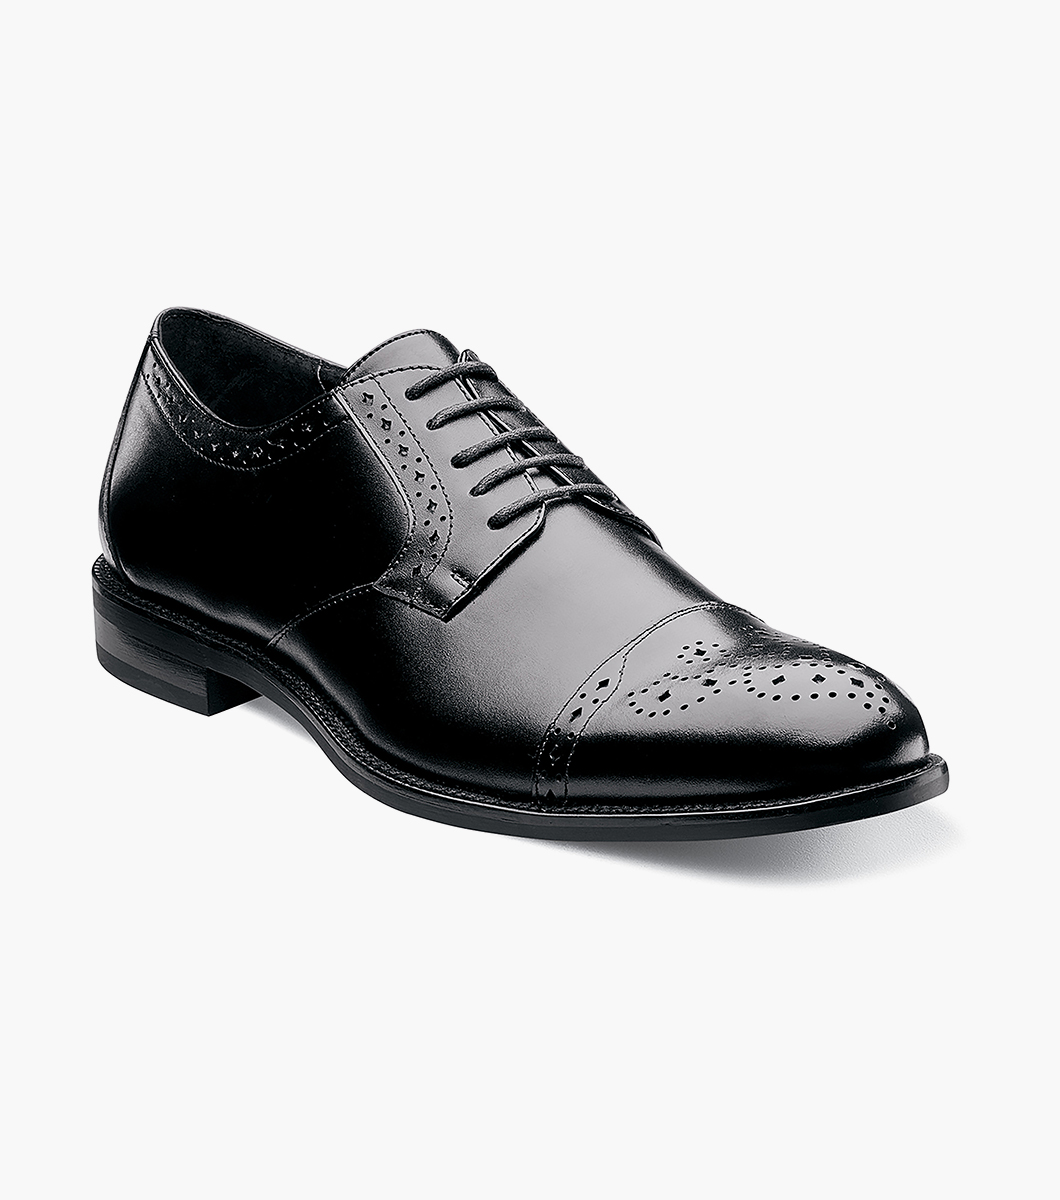 Clearance Shoes | Black Cap Toe Oxford | Stacy Adams Granville